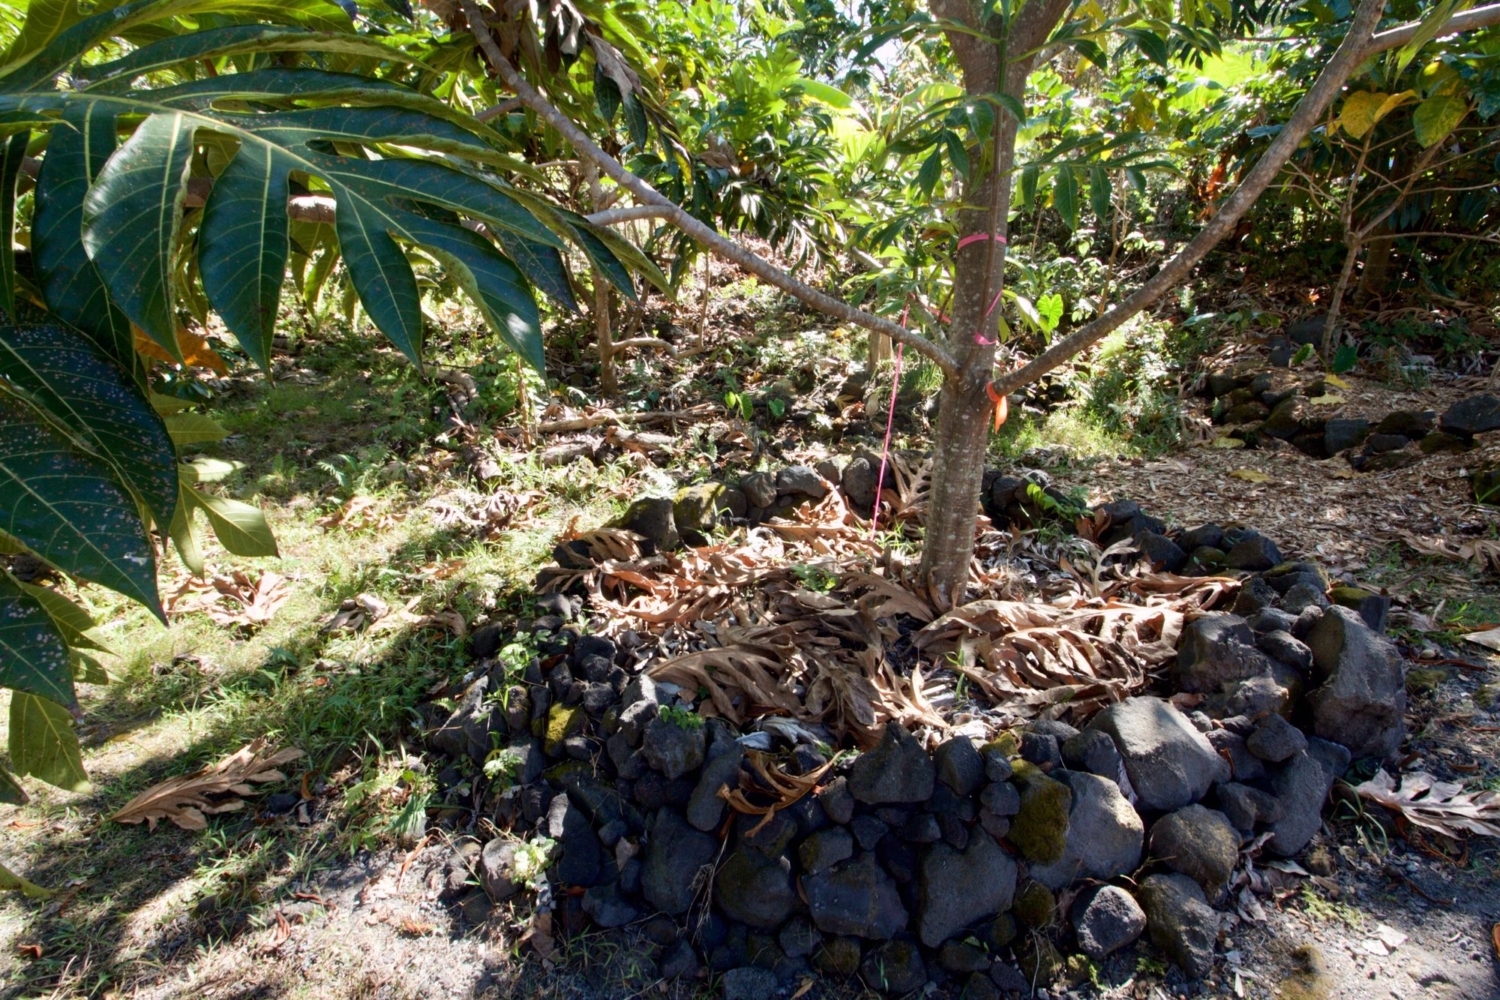 Tree in Kona, surrounded with lava rock, and mulched heavily with whole branches. Breadfruit can grow on marginal land, though more management is required for optimal yields.